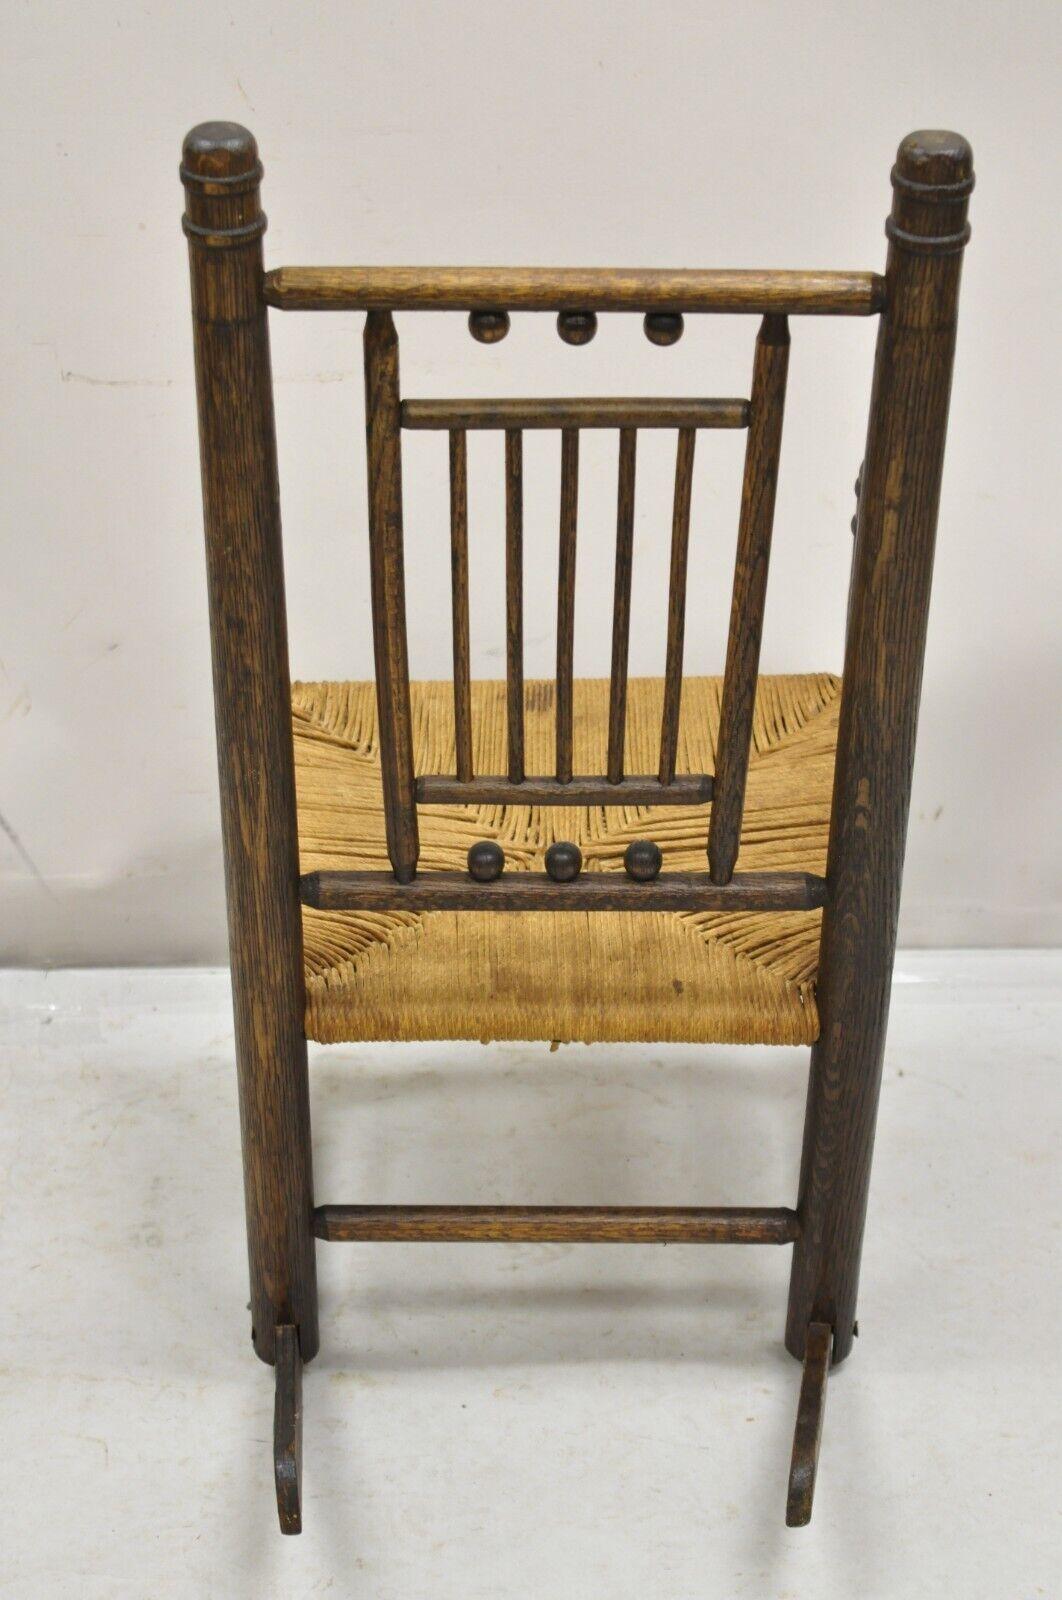 Antique Arts & Crafts Victorian Oak Wood Rush Seat Small Child's Rocking Chair For Sale 1